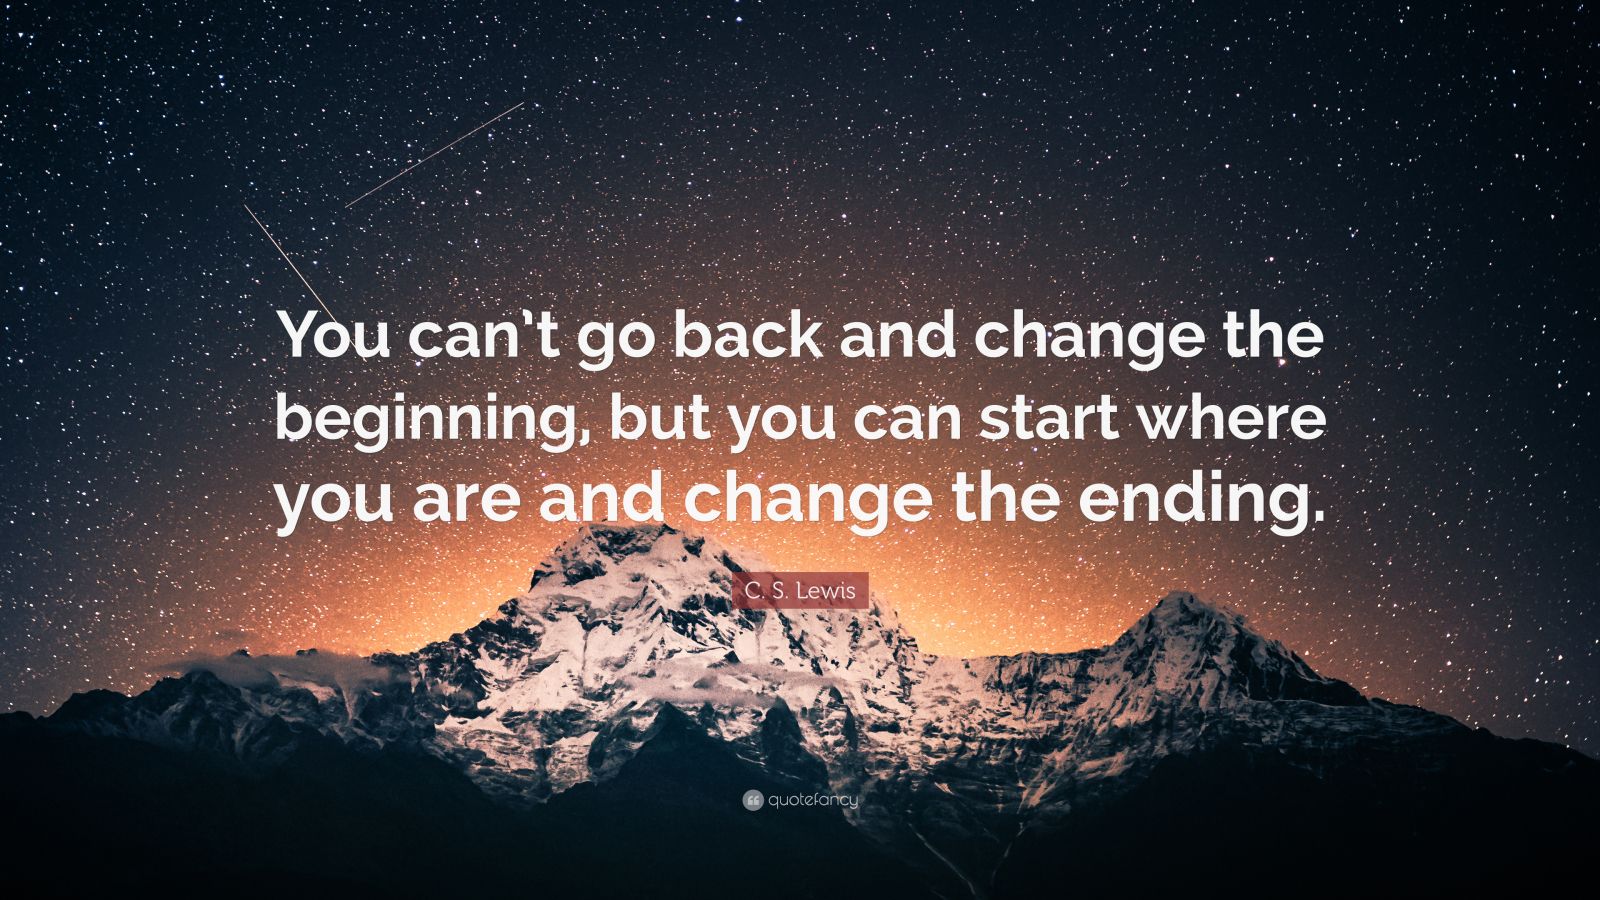 C. S. Lewis Quote: “You can’t go back and change the beginning, but you